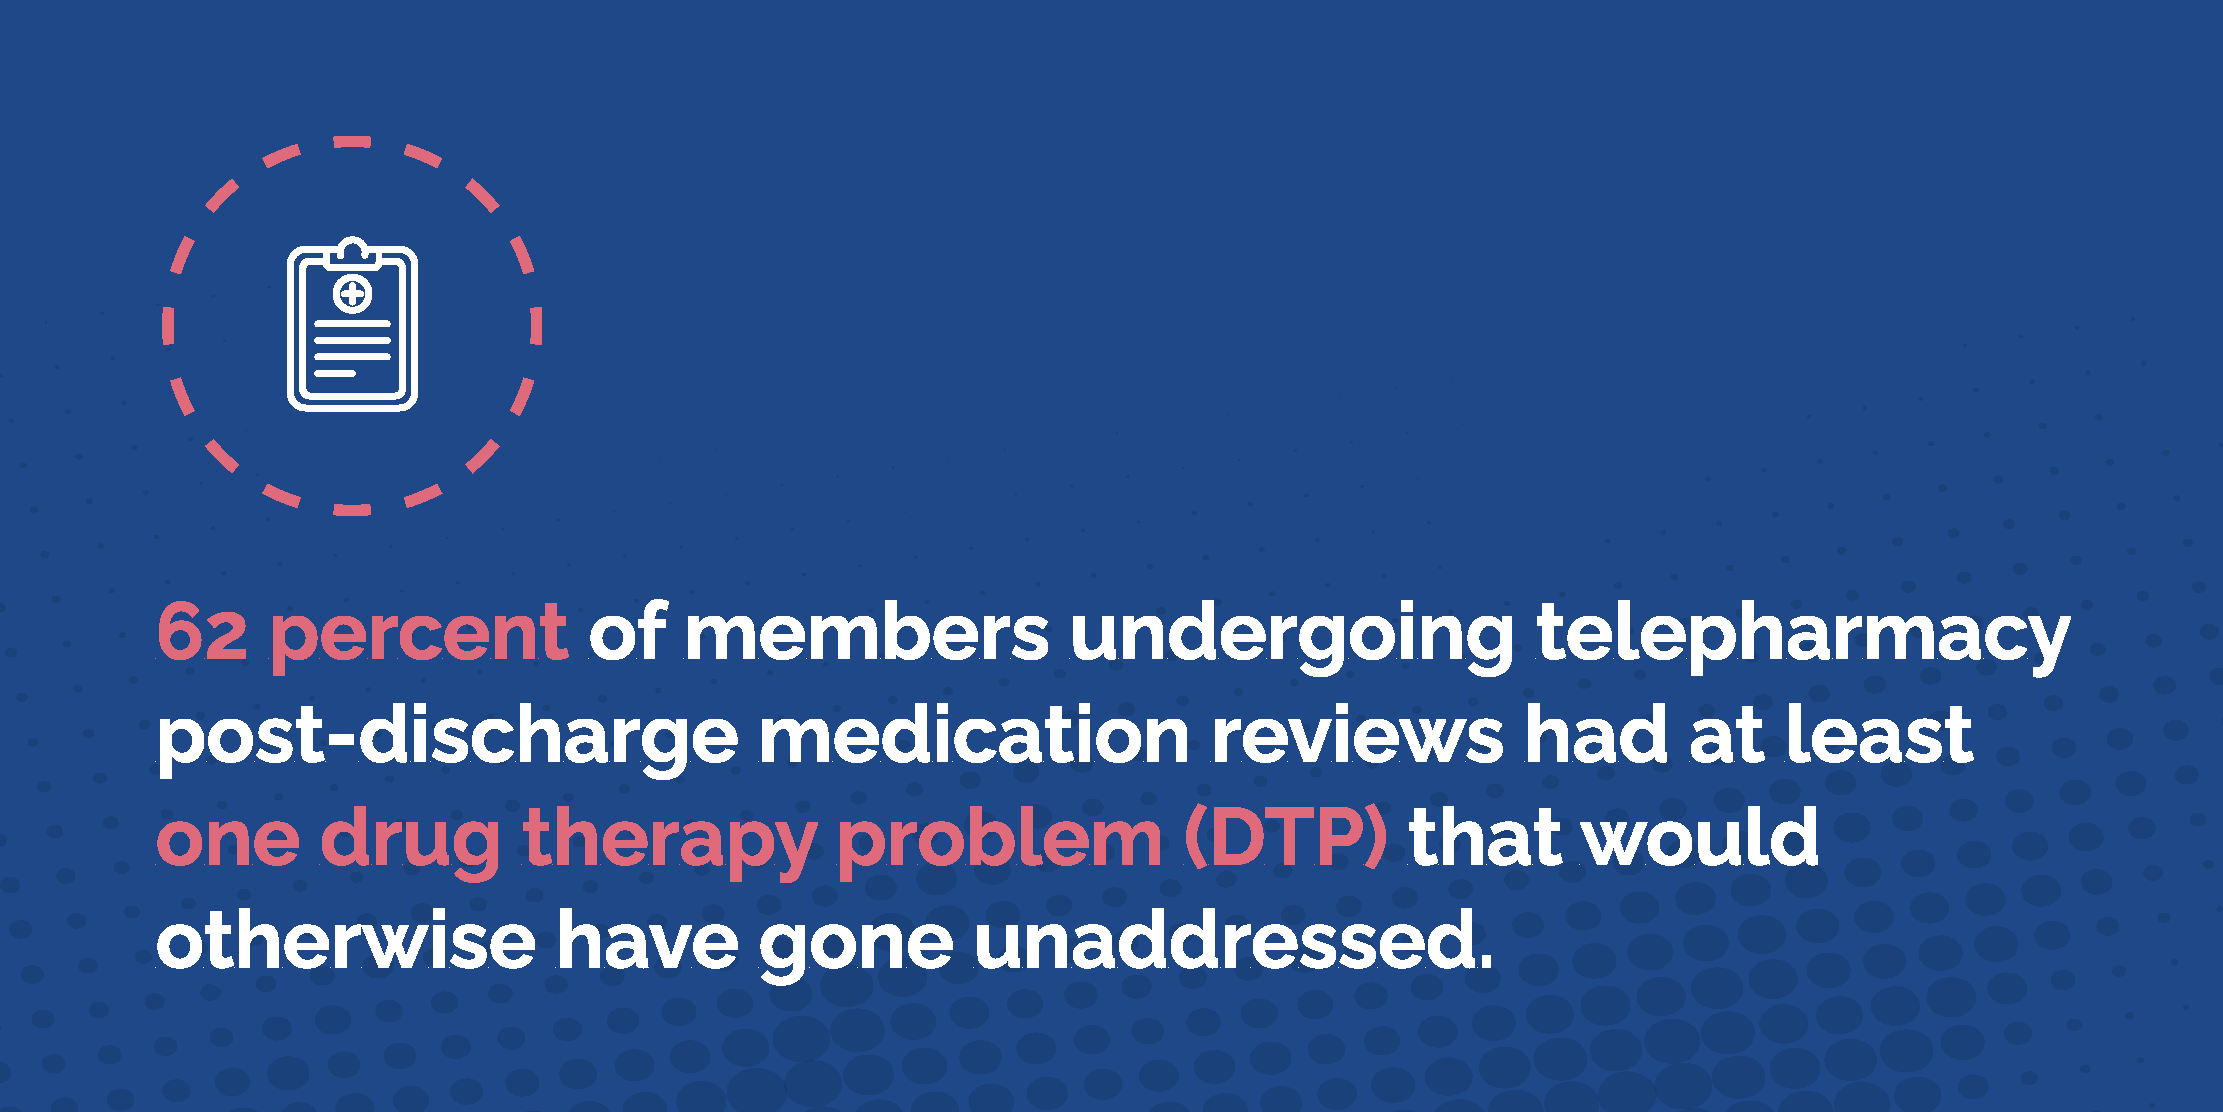 Callout: 62 percent of members undergoing telepharmacy post-discharge medication reviews had at least one drug therapy problem (DTP) that would otherwise have gone unaddressed.